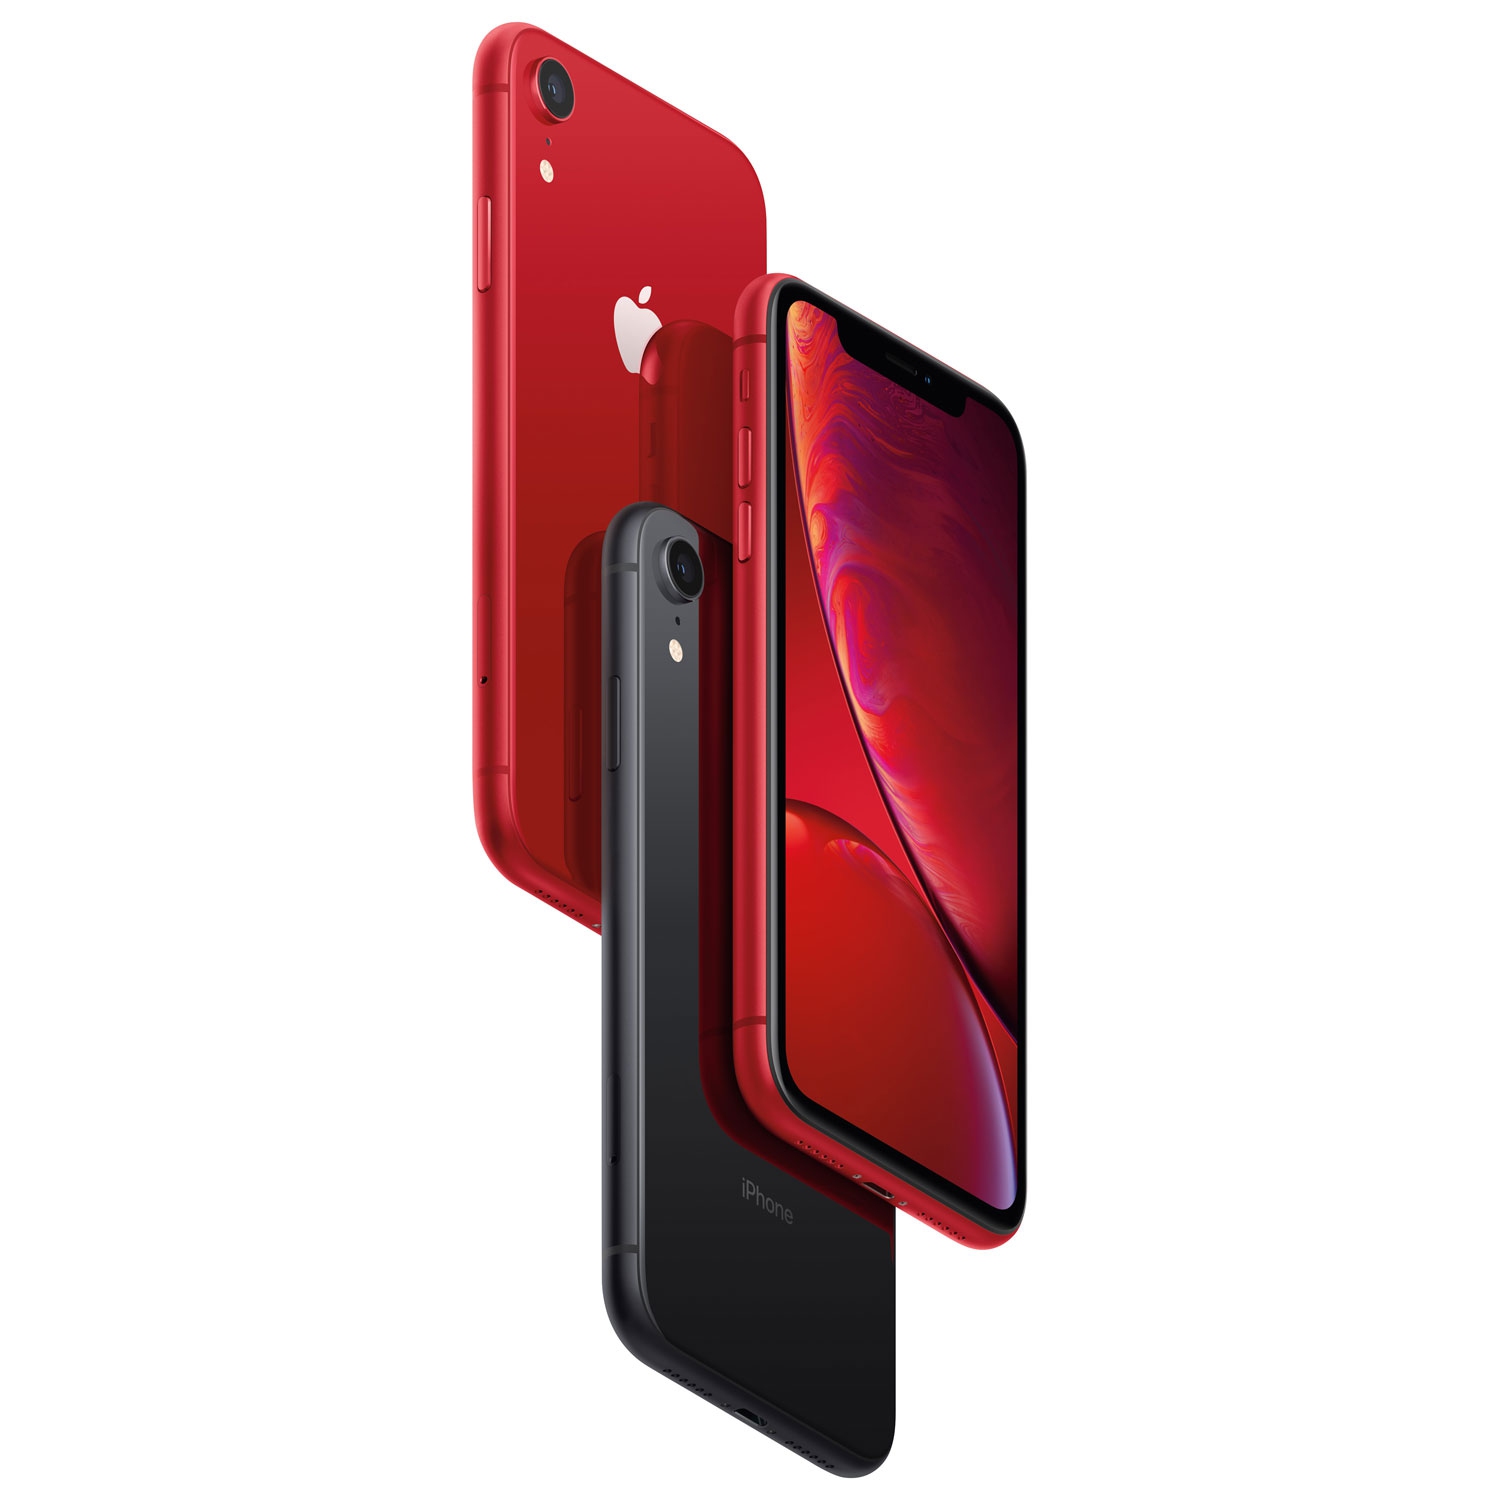 Apple iPhone XR 64GB Smartphone - (Product)RED - Unlocked - Open